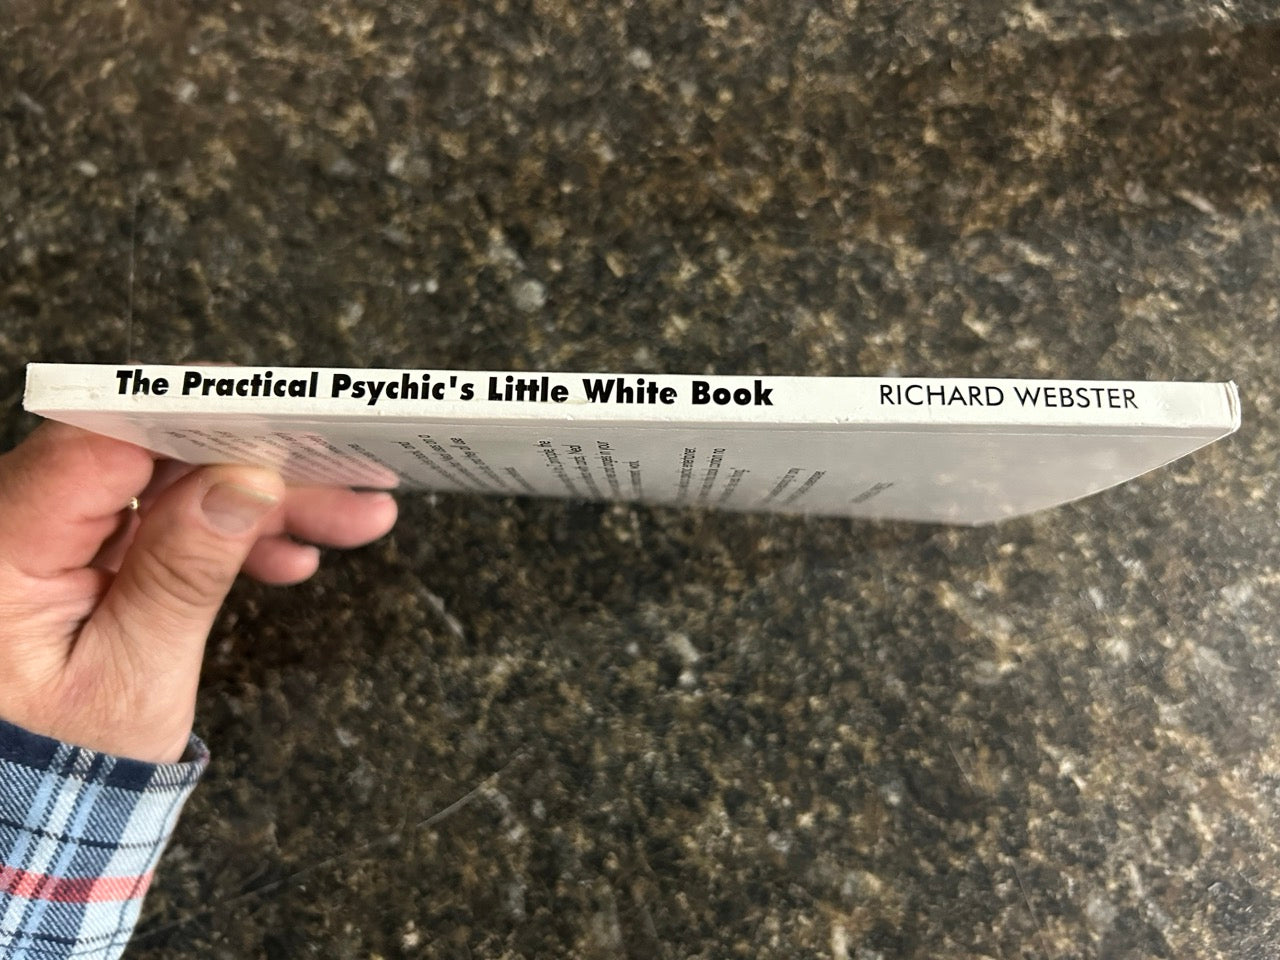 The Practical Psychic's Little White Book: More Mentalism from Neal Scryer - Richard Webster